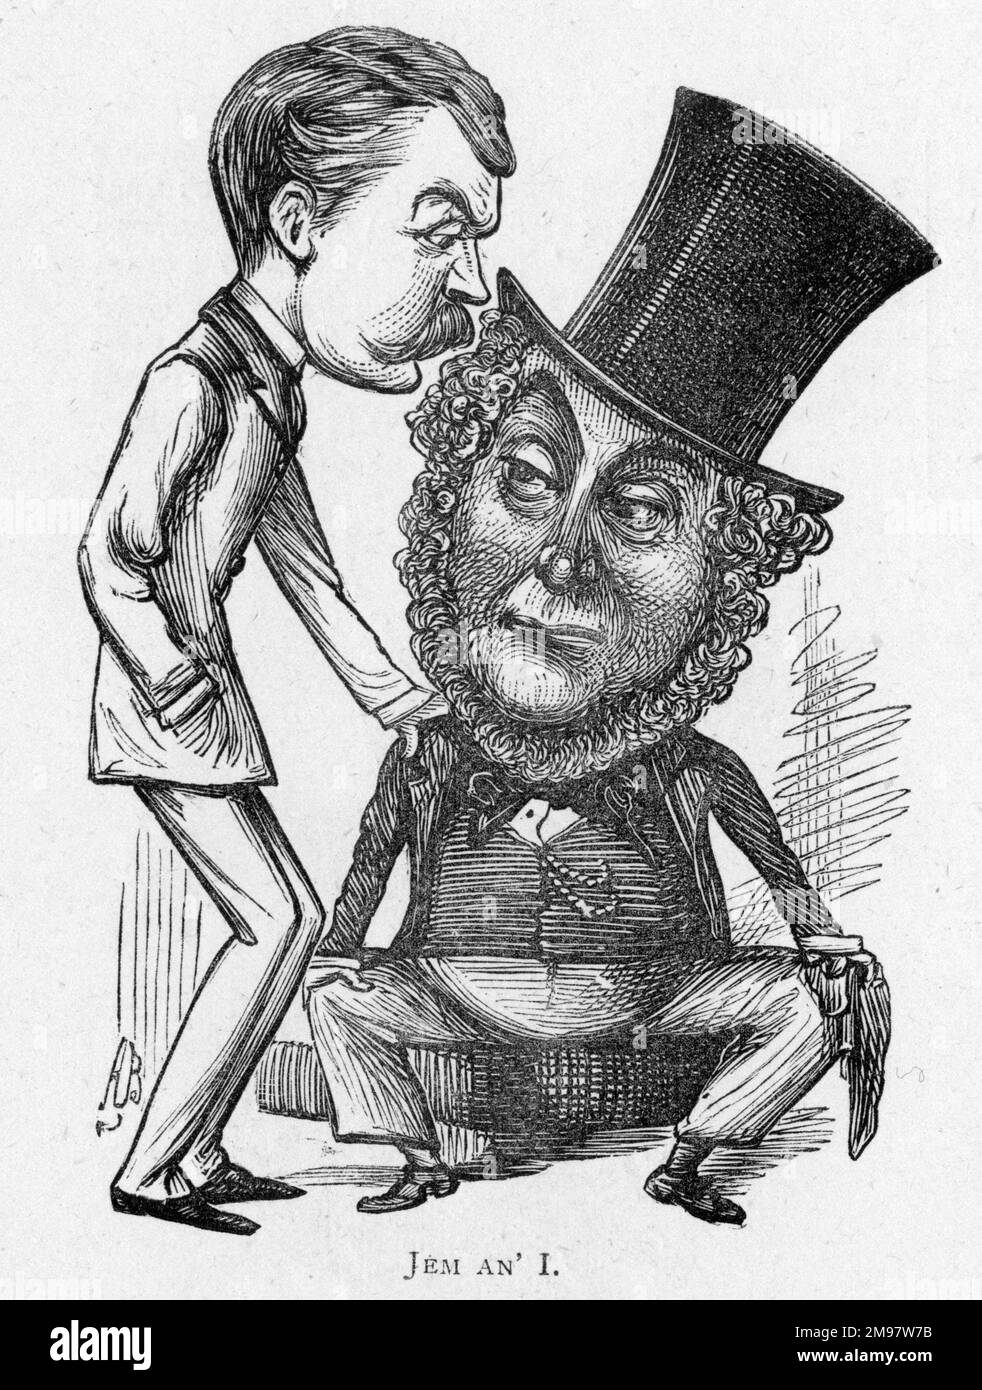 Cartoon of David James (right, 1839-1893) and Thomas Thorne (left, 1841-1918) -- Jem an' I.  James was an English comic actor, and one of the founders, with Thorne of the Vaudeville Theatre, London. Thorne was an English actor and theatre manager. Stock Photo